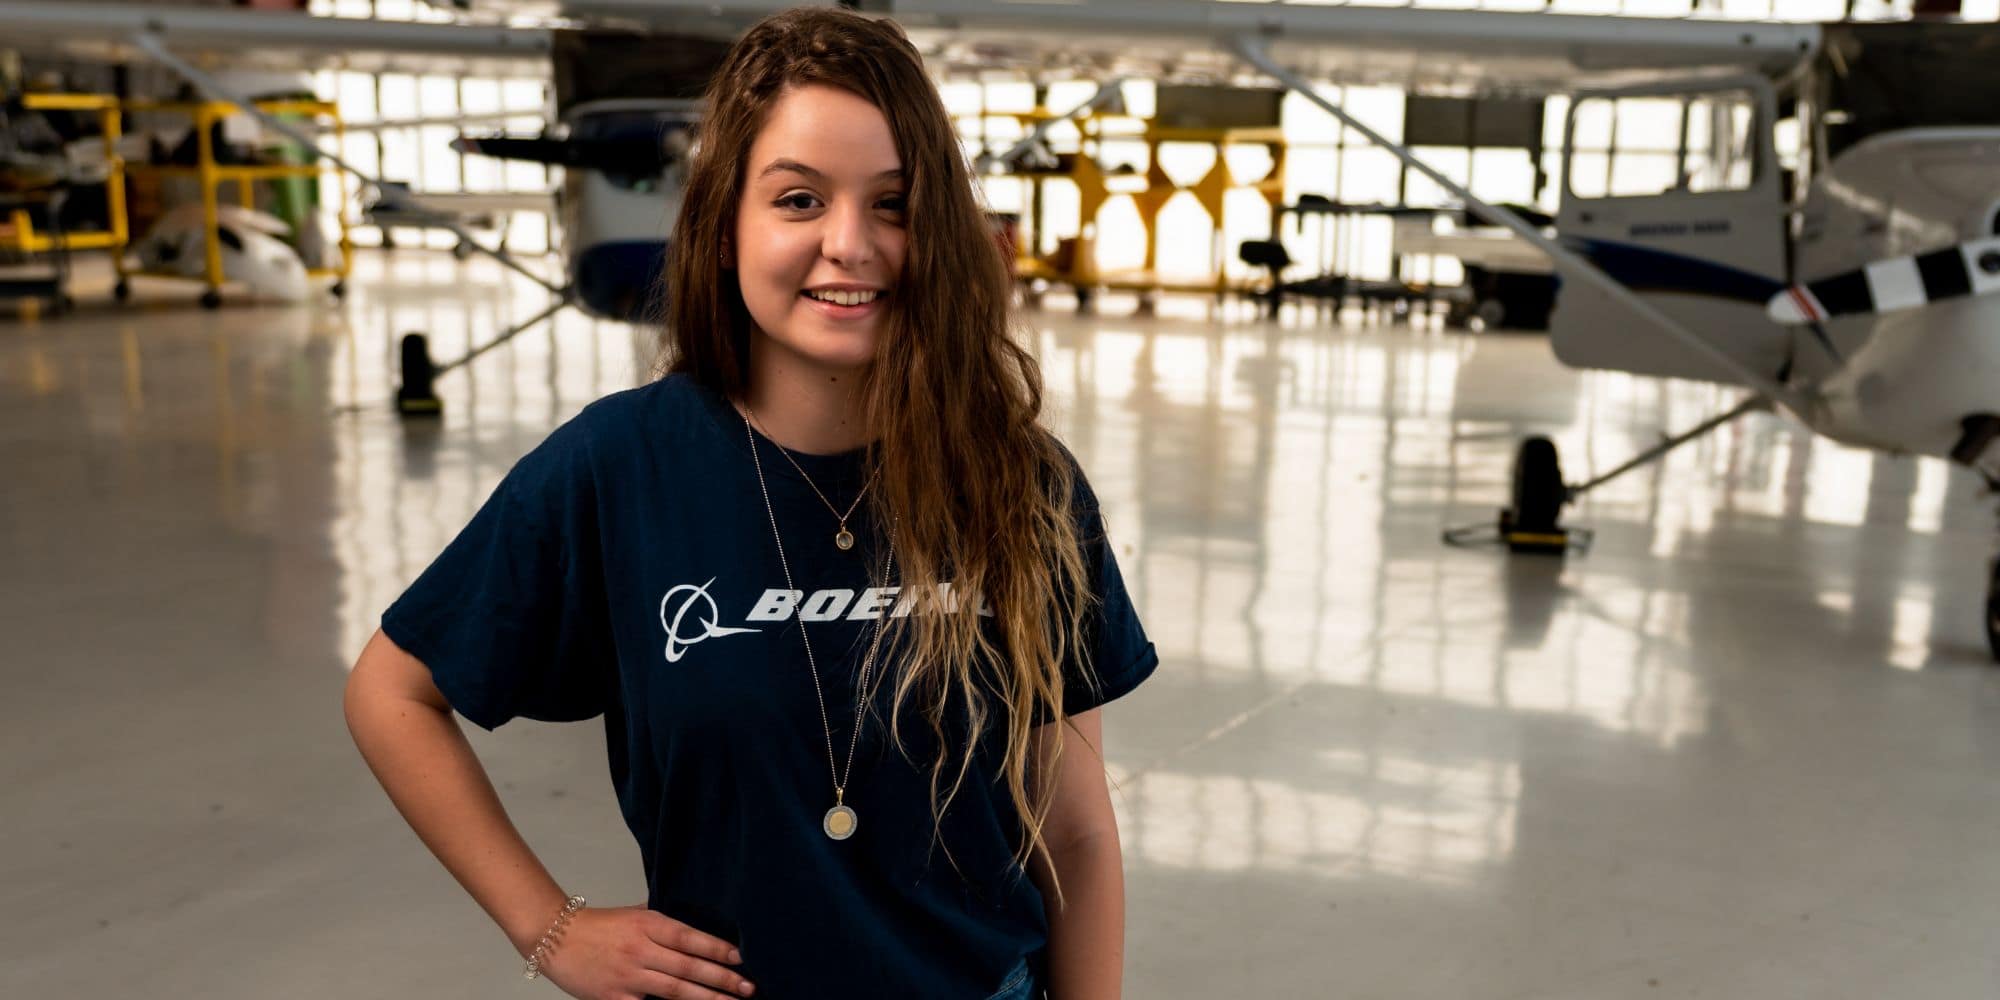 Embry-Riddle freshman Bella Memeo is a pilot, artist and Boeing Scholar. (Photo: Embry-Riddle/Connor McShane)